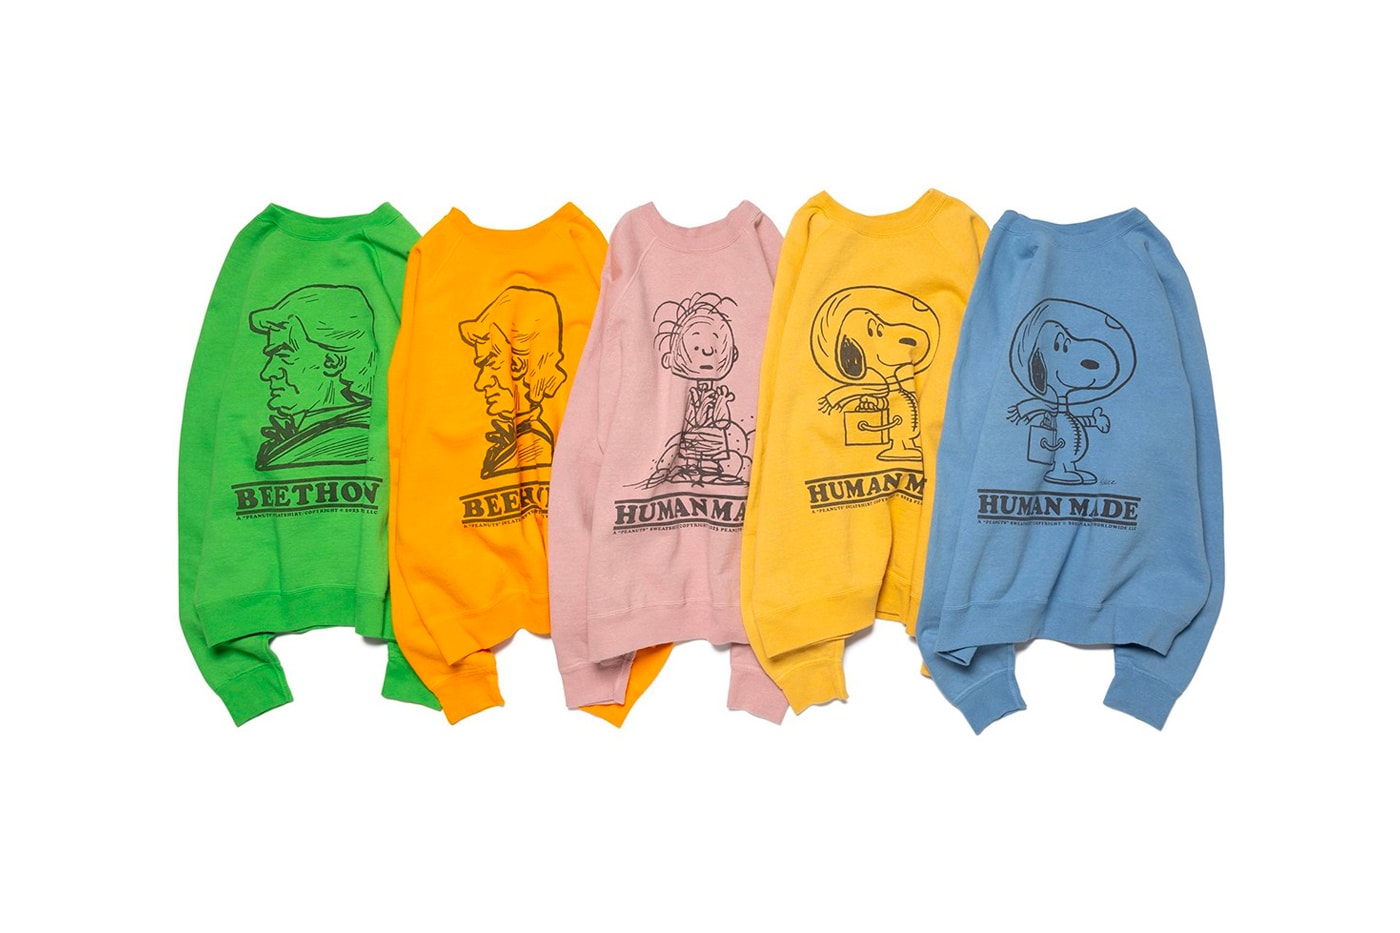 Human Made Drops Vintage-Style Peanuts Sweatshirt Collaboration vintage snoopy charlie brown pig pen schroeder beethoven nigo pharrell williams girls dont cry verdy